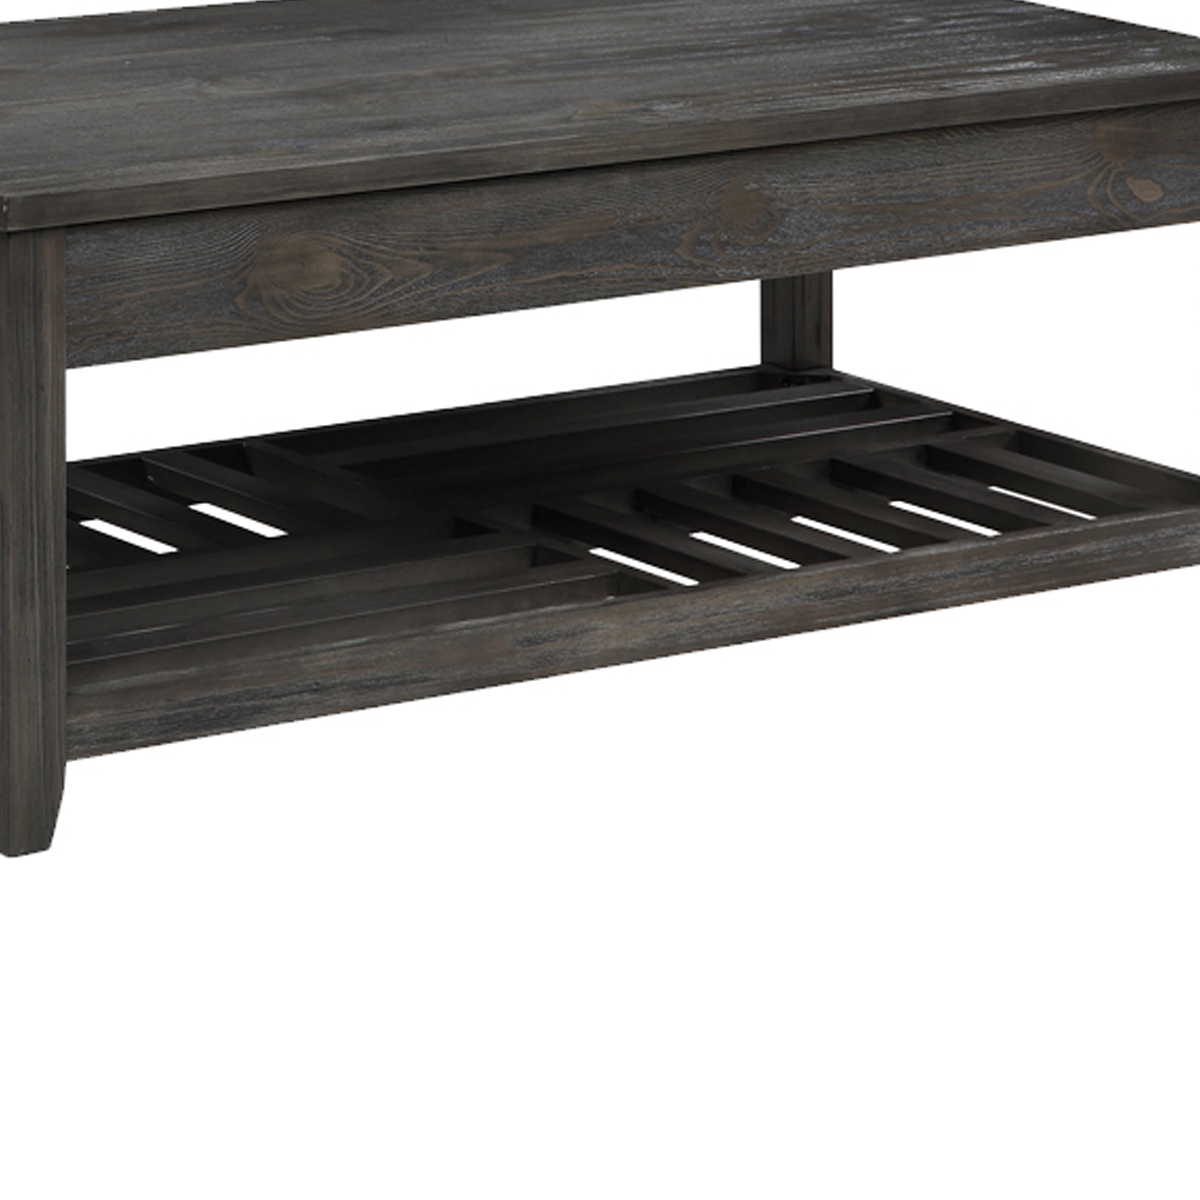 Transitional Style Wooden Coffee Table With Open Slatted Shelf, Gray- Saltoro Sherpi